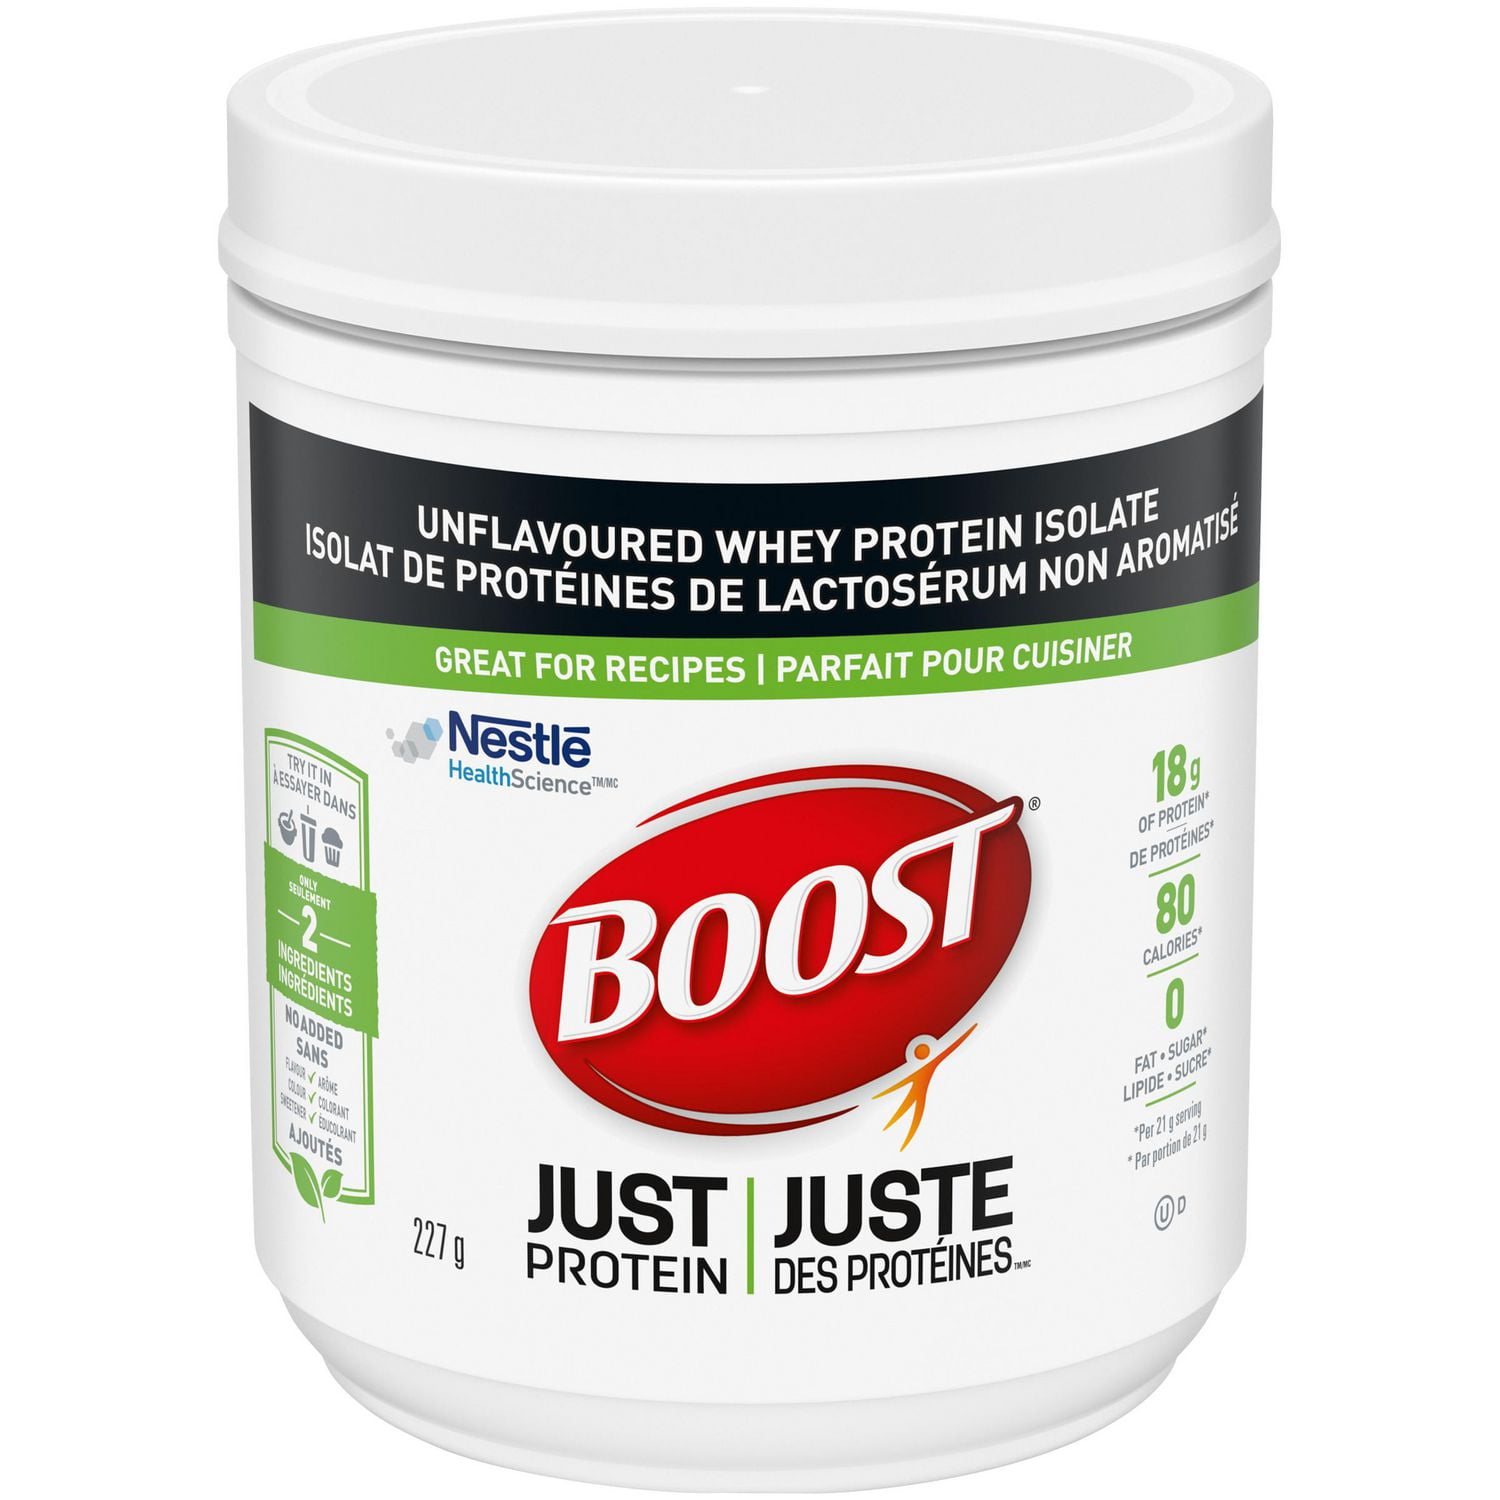 BOOST JUST PROTEIN Unflavoured Instant Whey Protein Isolate Powder